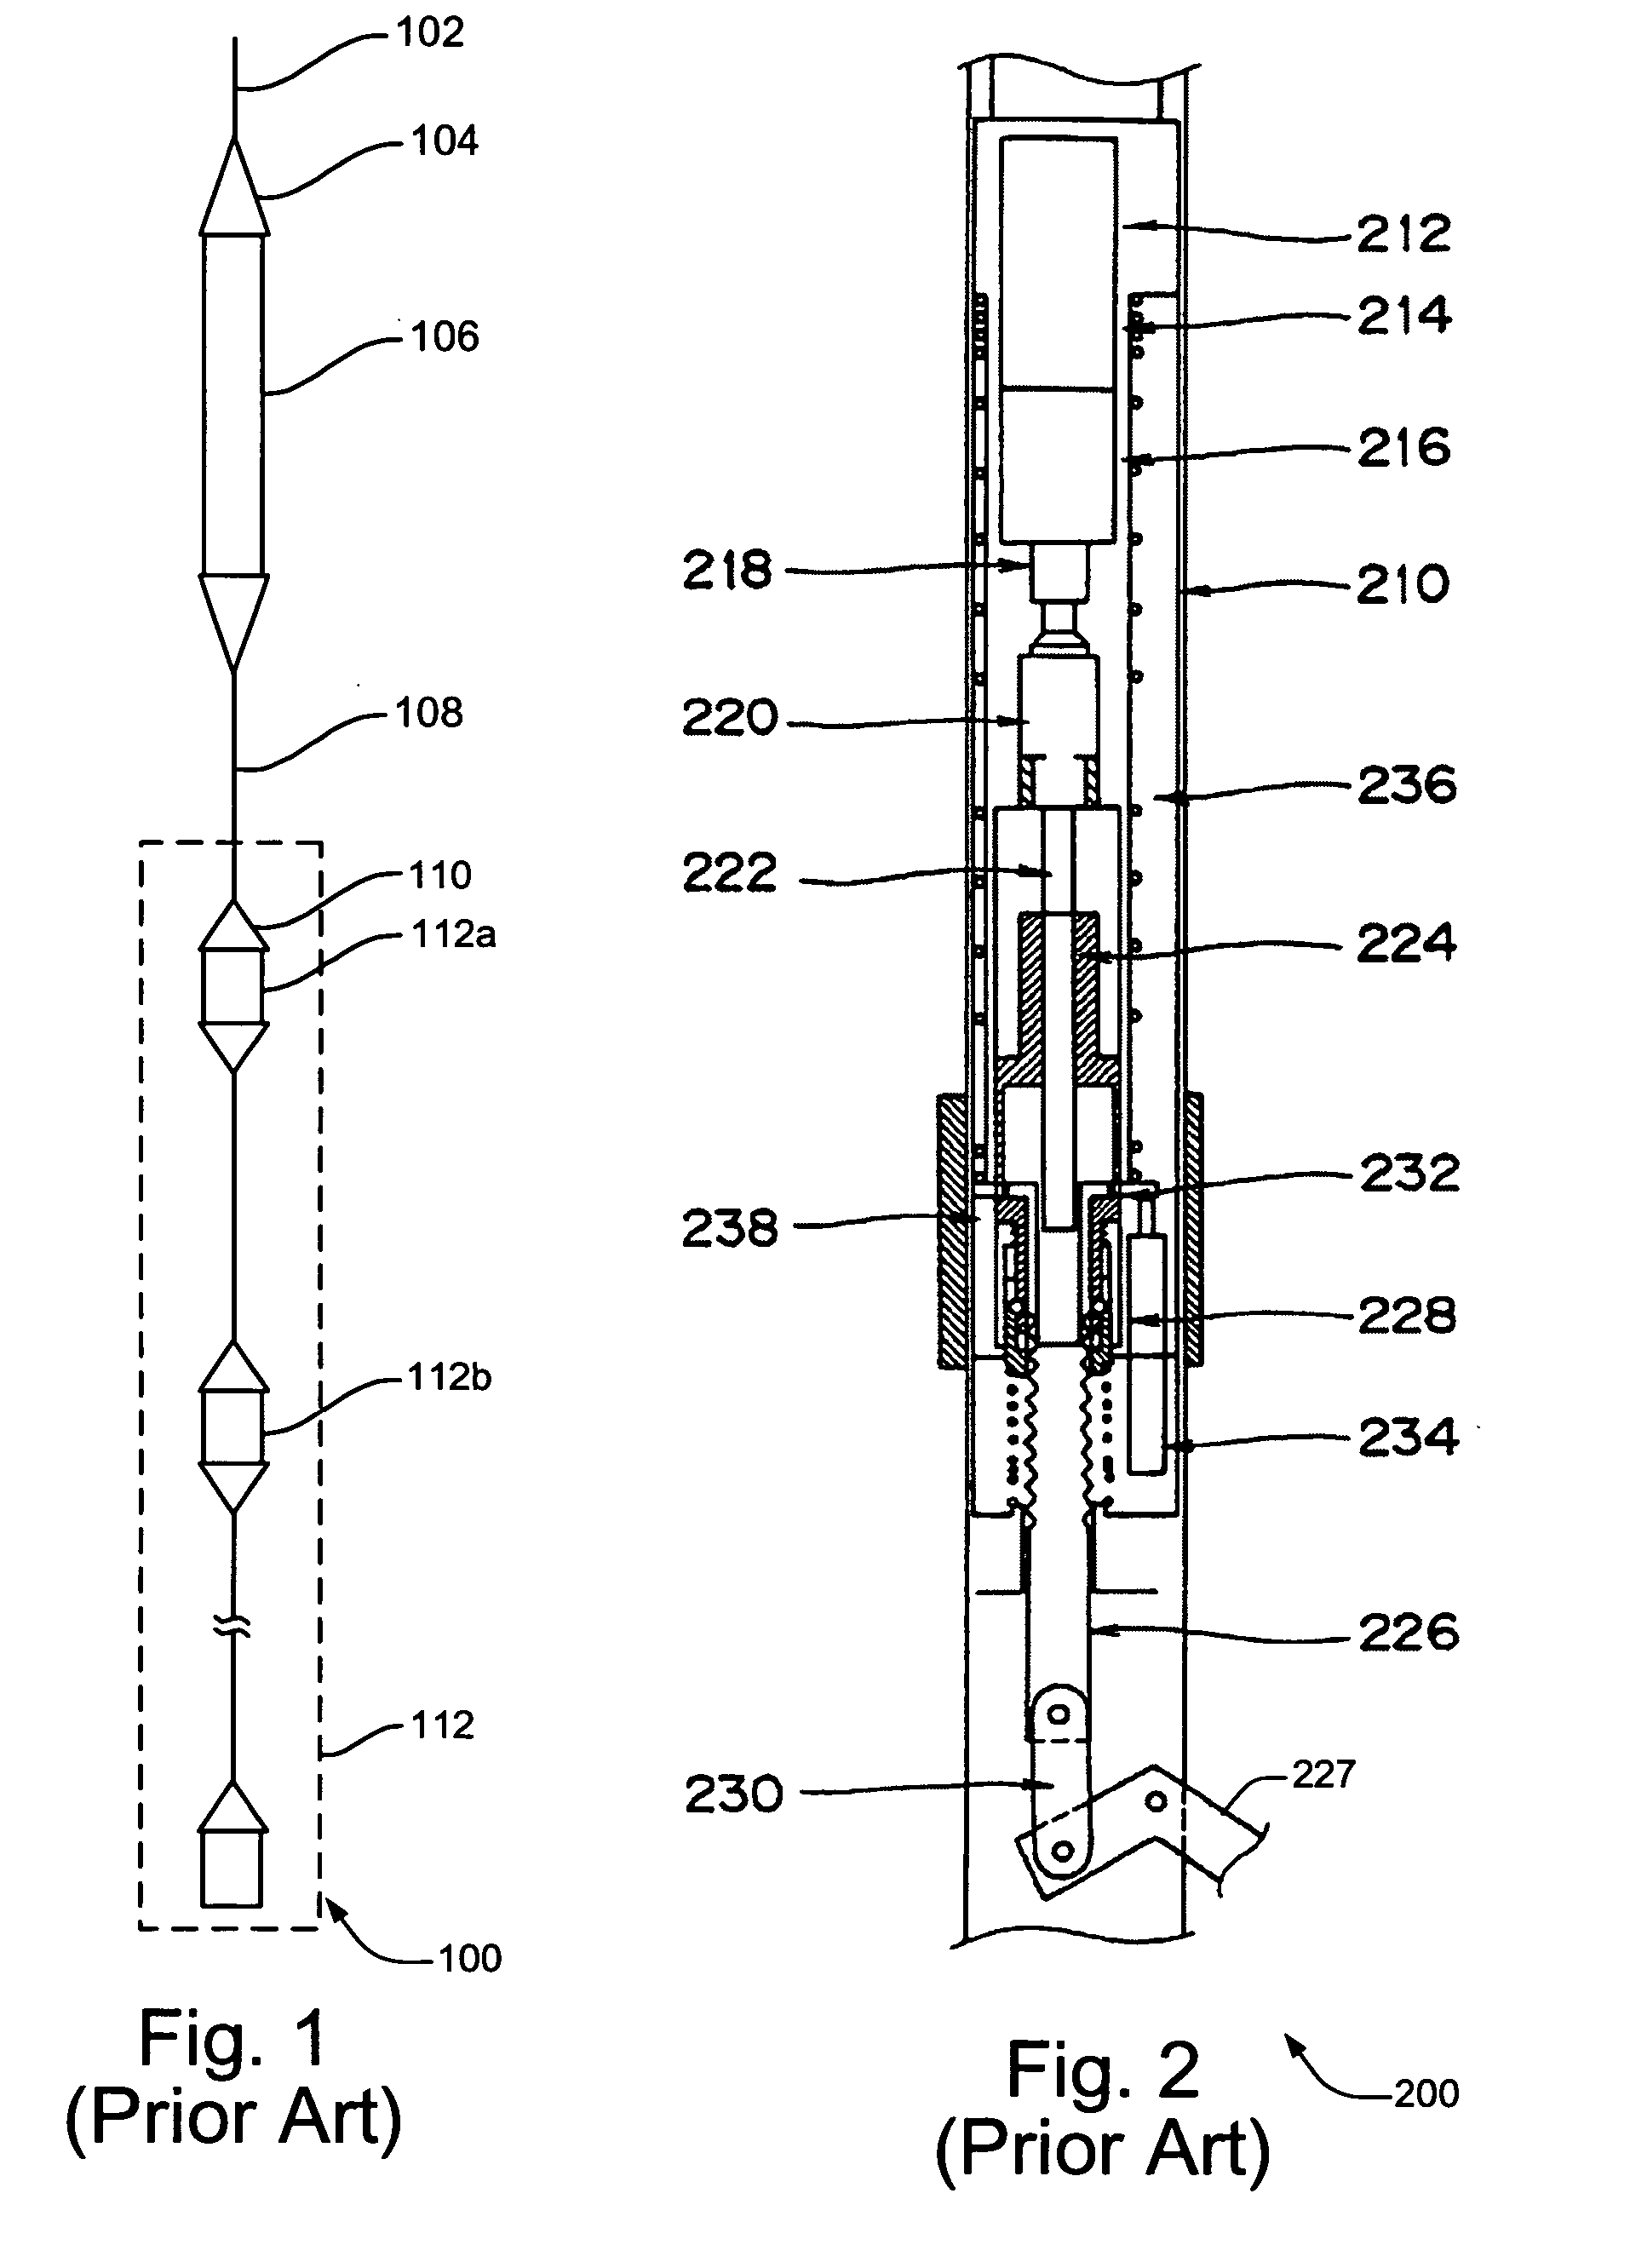 Anchor arm for seismic logging tool